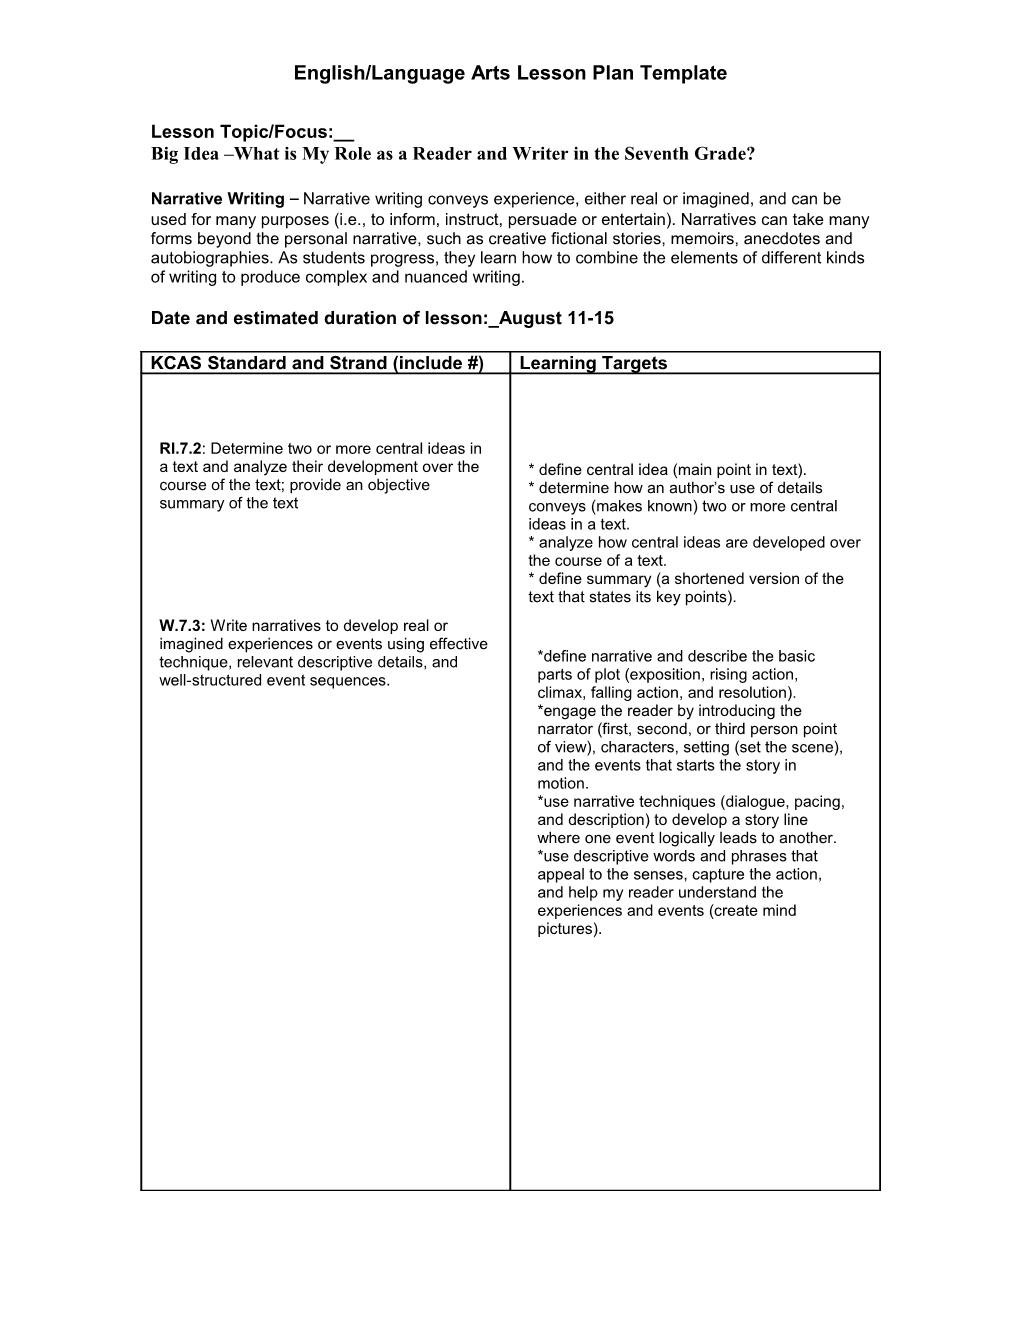 Part II: Lesson Plan Template